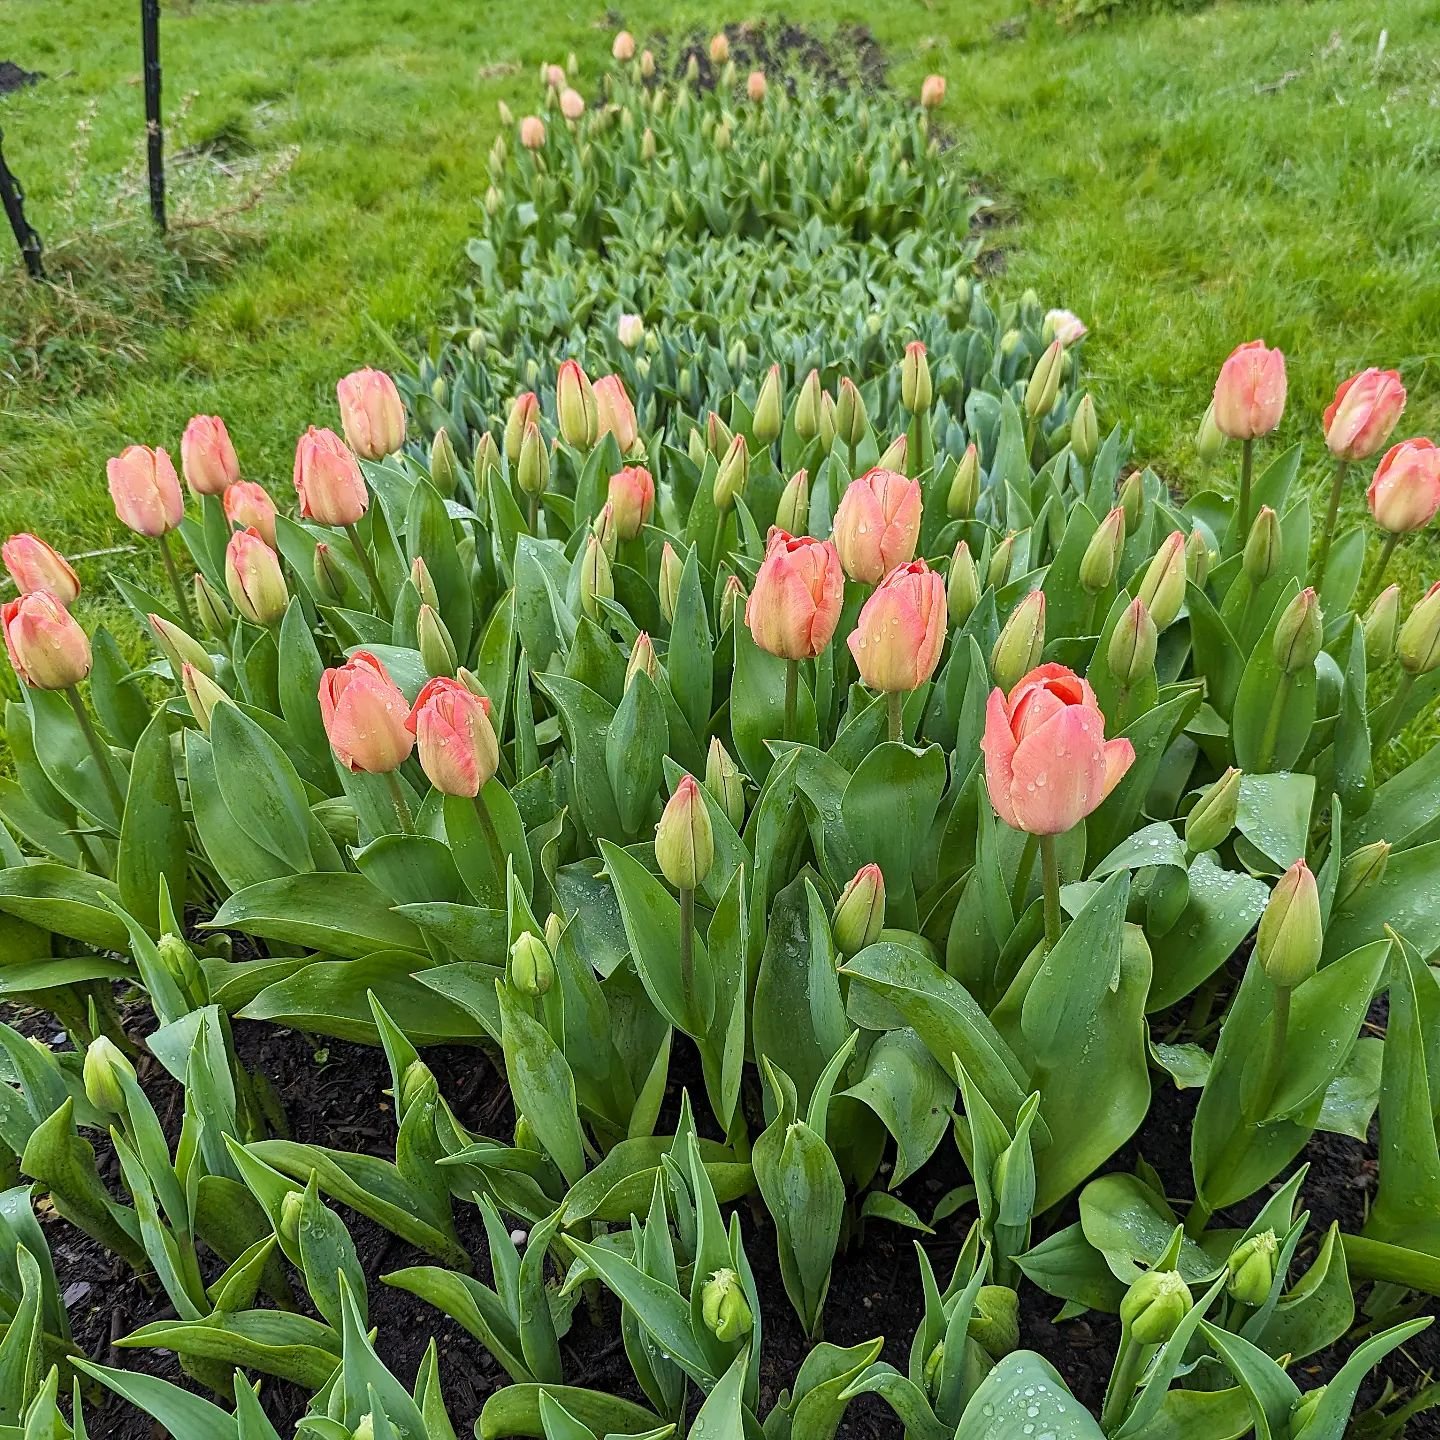 Well, we have Tulips, we have Stocks, Wallflowers, blossoms and beautiful foliage. I'd say we might as well make some bunches up and start our season @ffynnonhomestore . What do you reckon?

Delivery first thing Tuesday of next week. I will remind yo